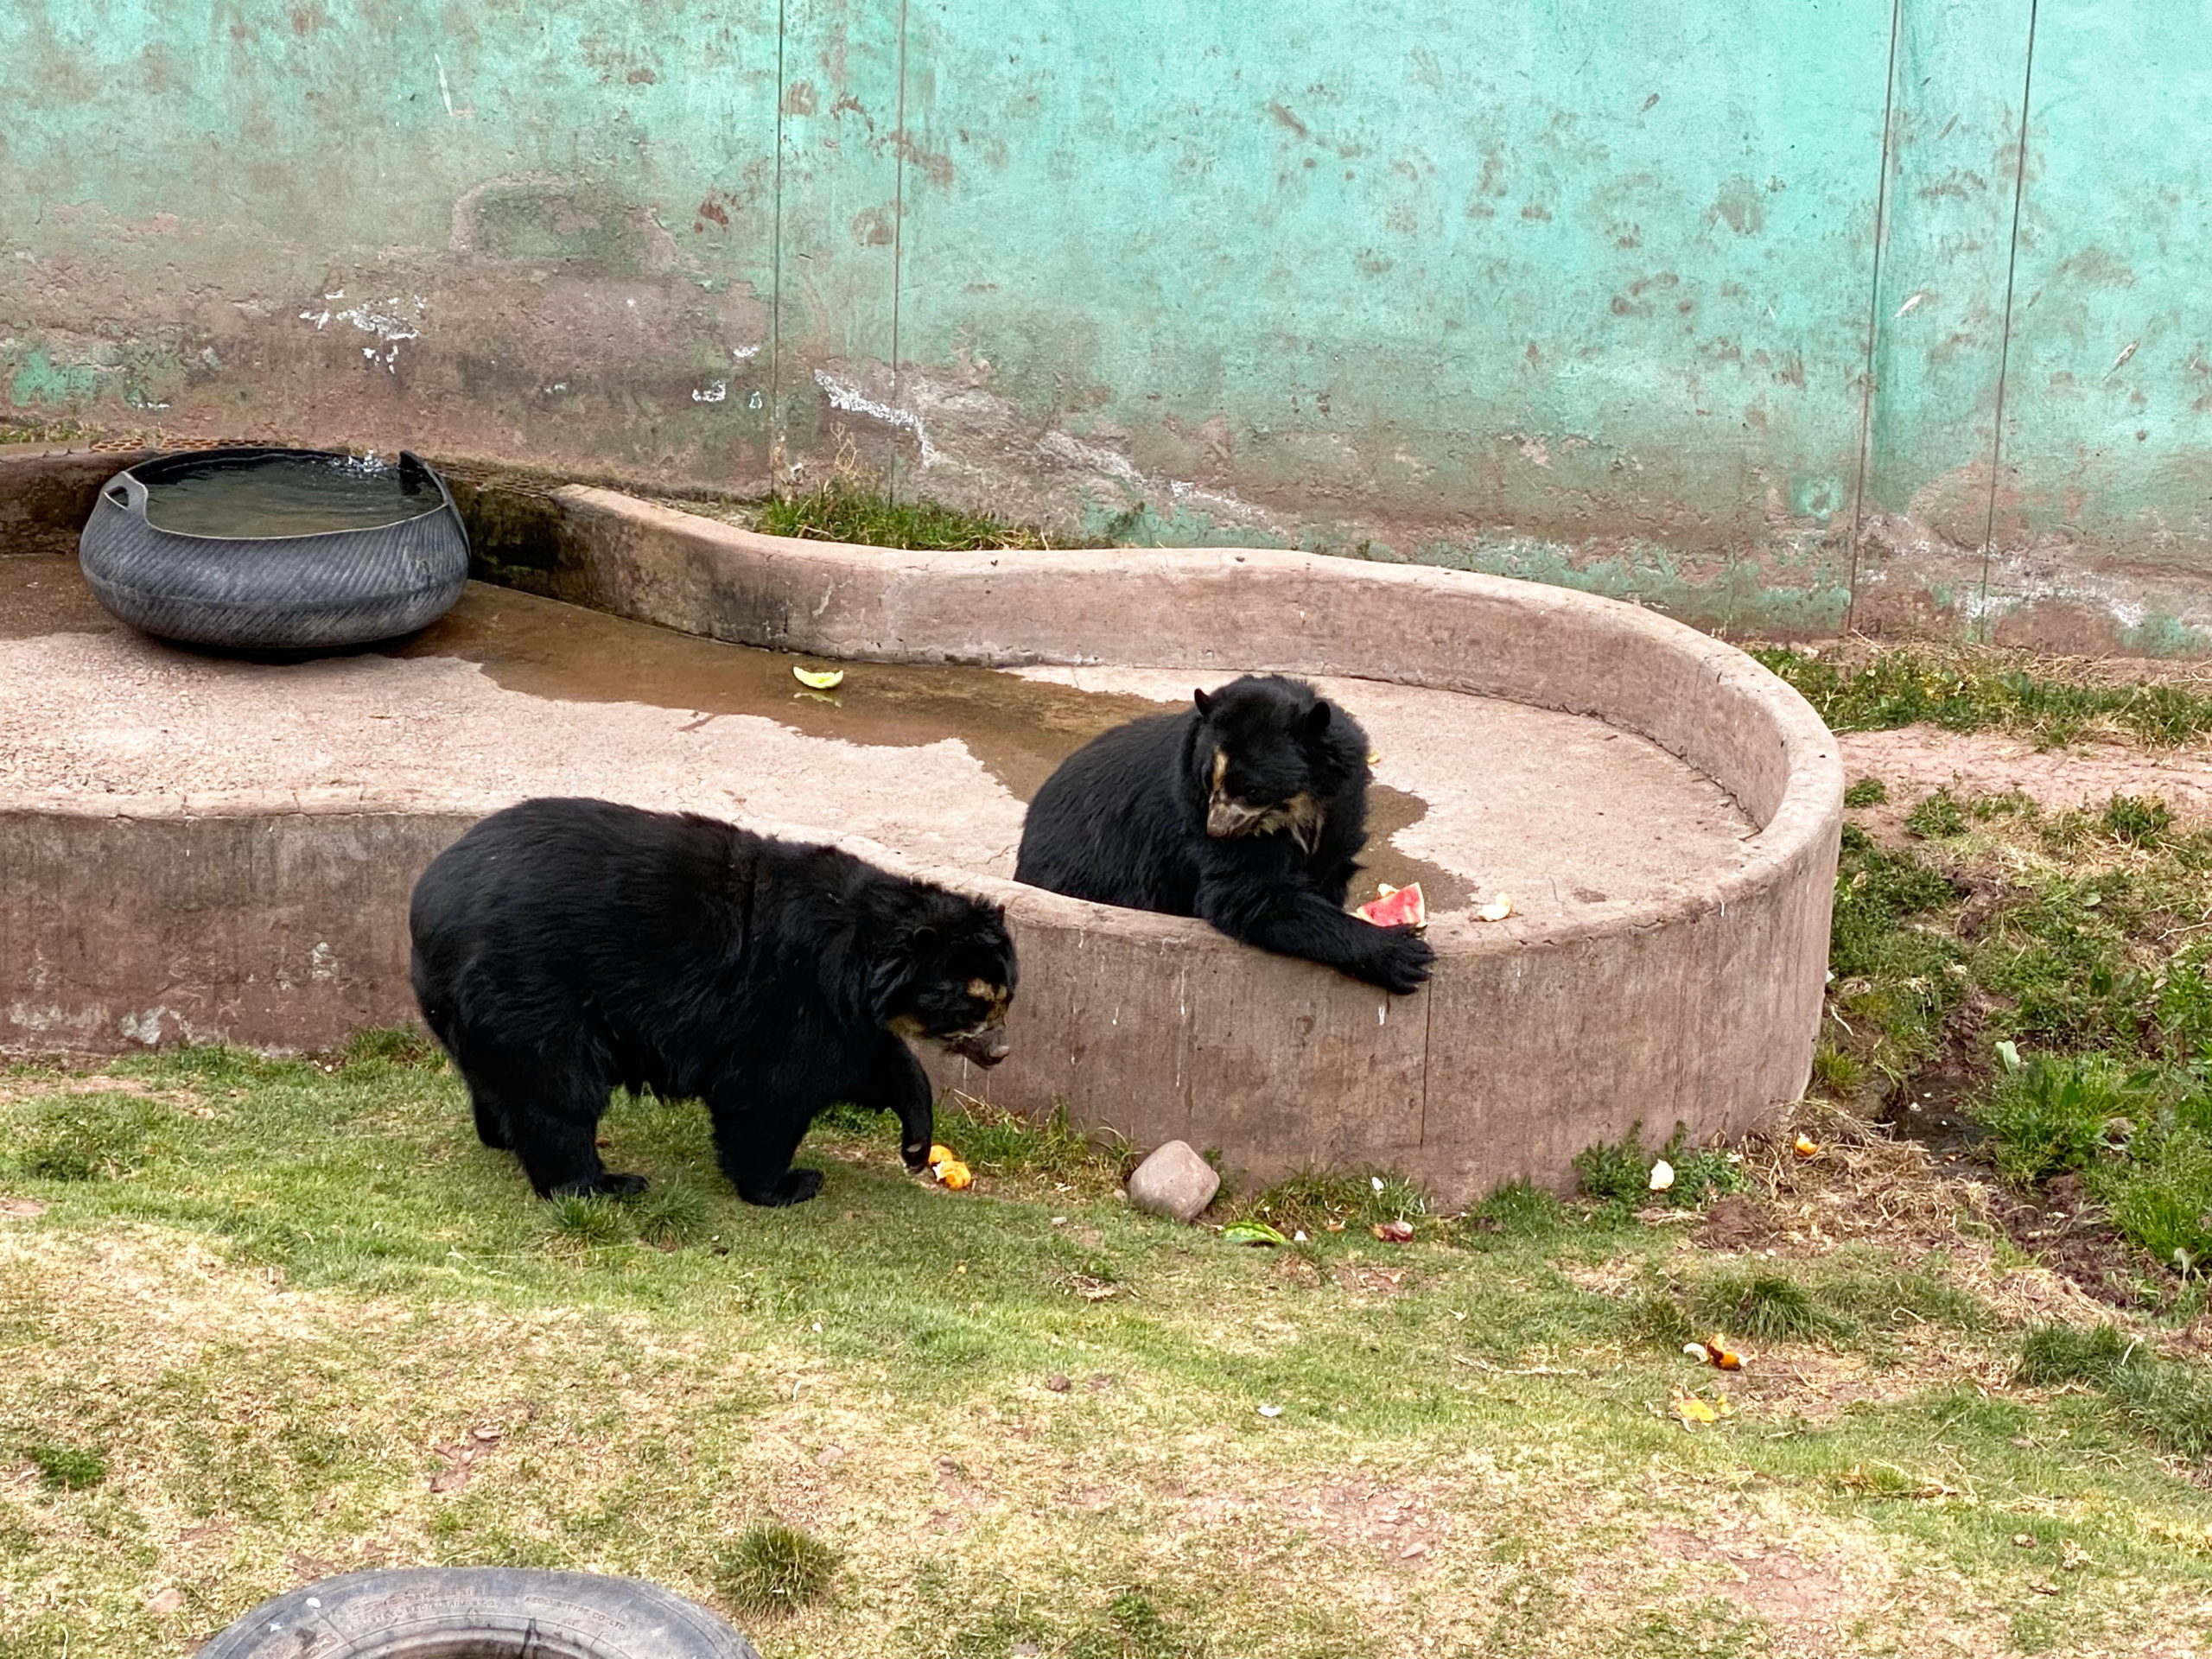 Bears in a zoo are sad.